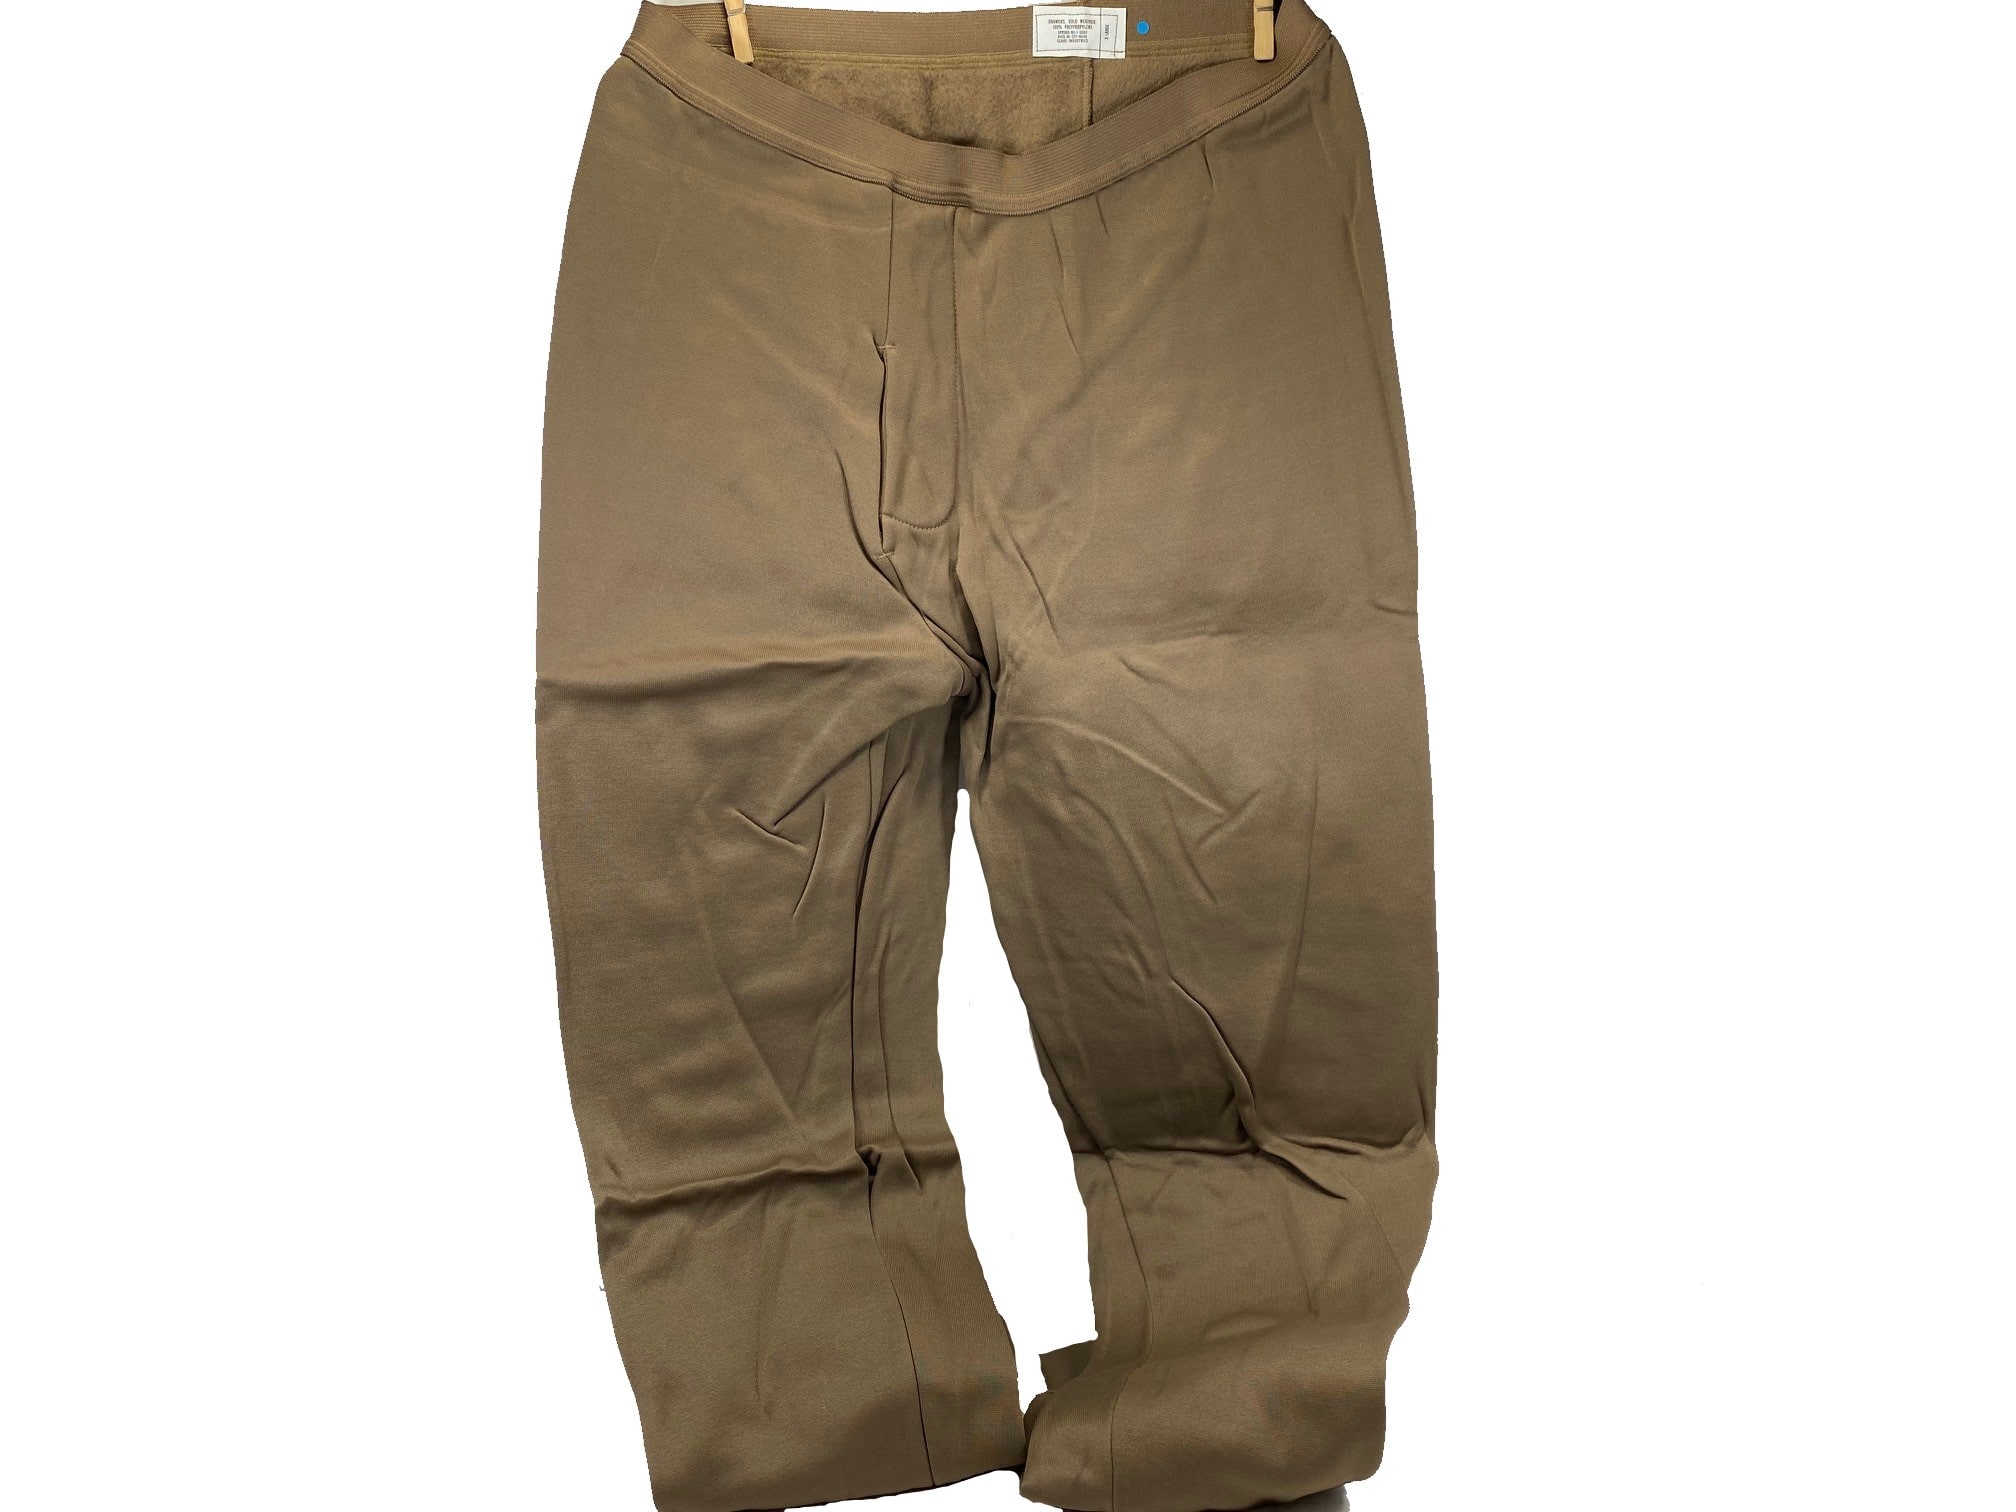 Polypro Thermals, Pants. Brown size XL, New - Omahas Army Navy Surplus